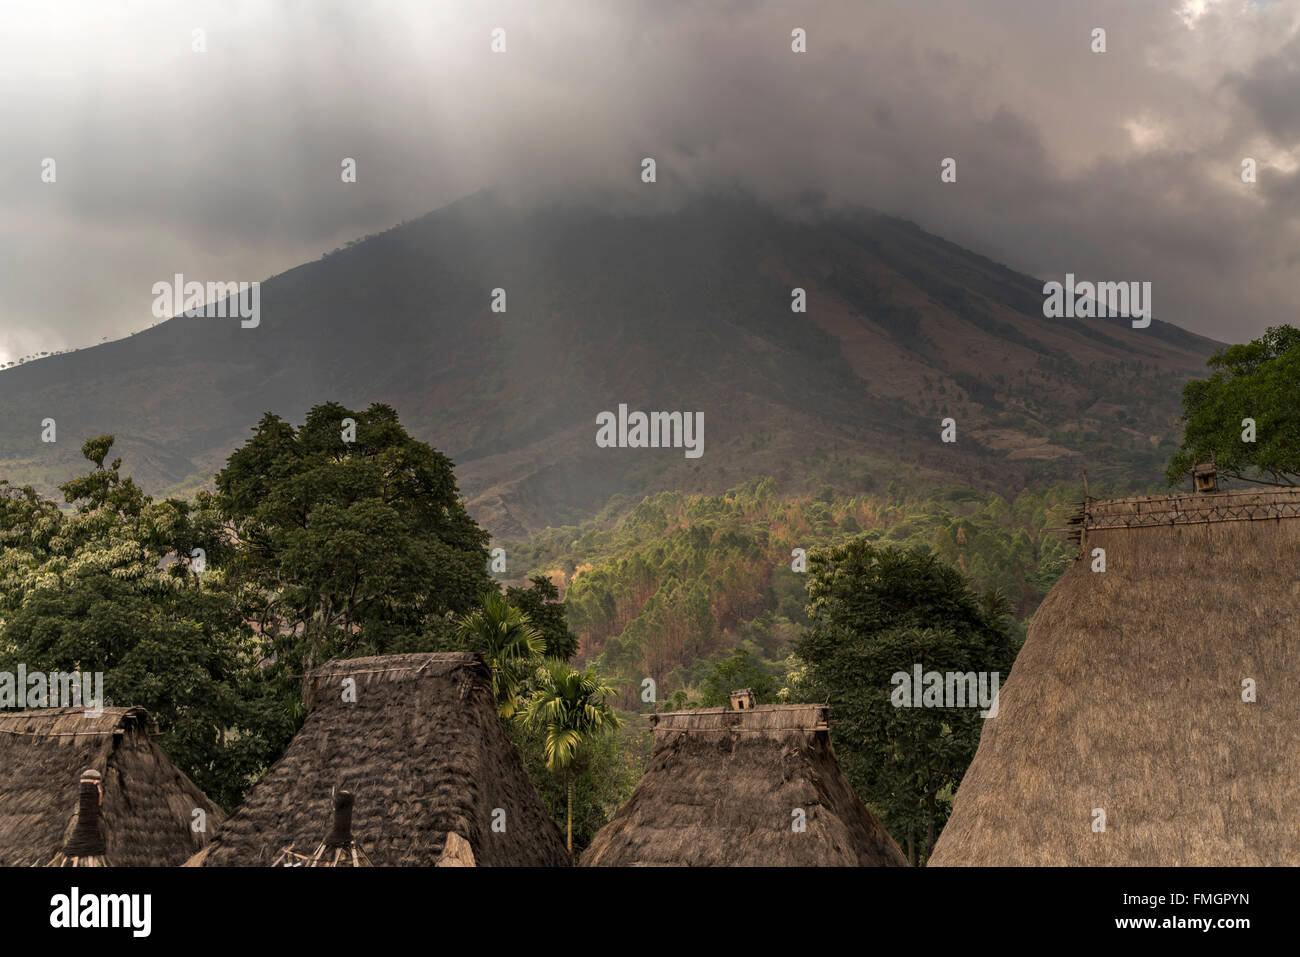 Inerie Volcano and traditional high thatch-roofed houses in the Ngada village Bena near Bajawa, Flores, Indonesia, Asia Stock Photo